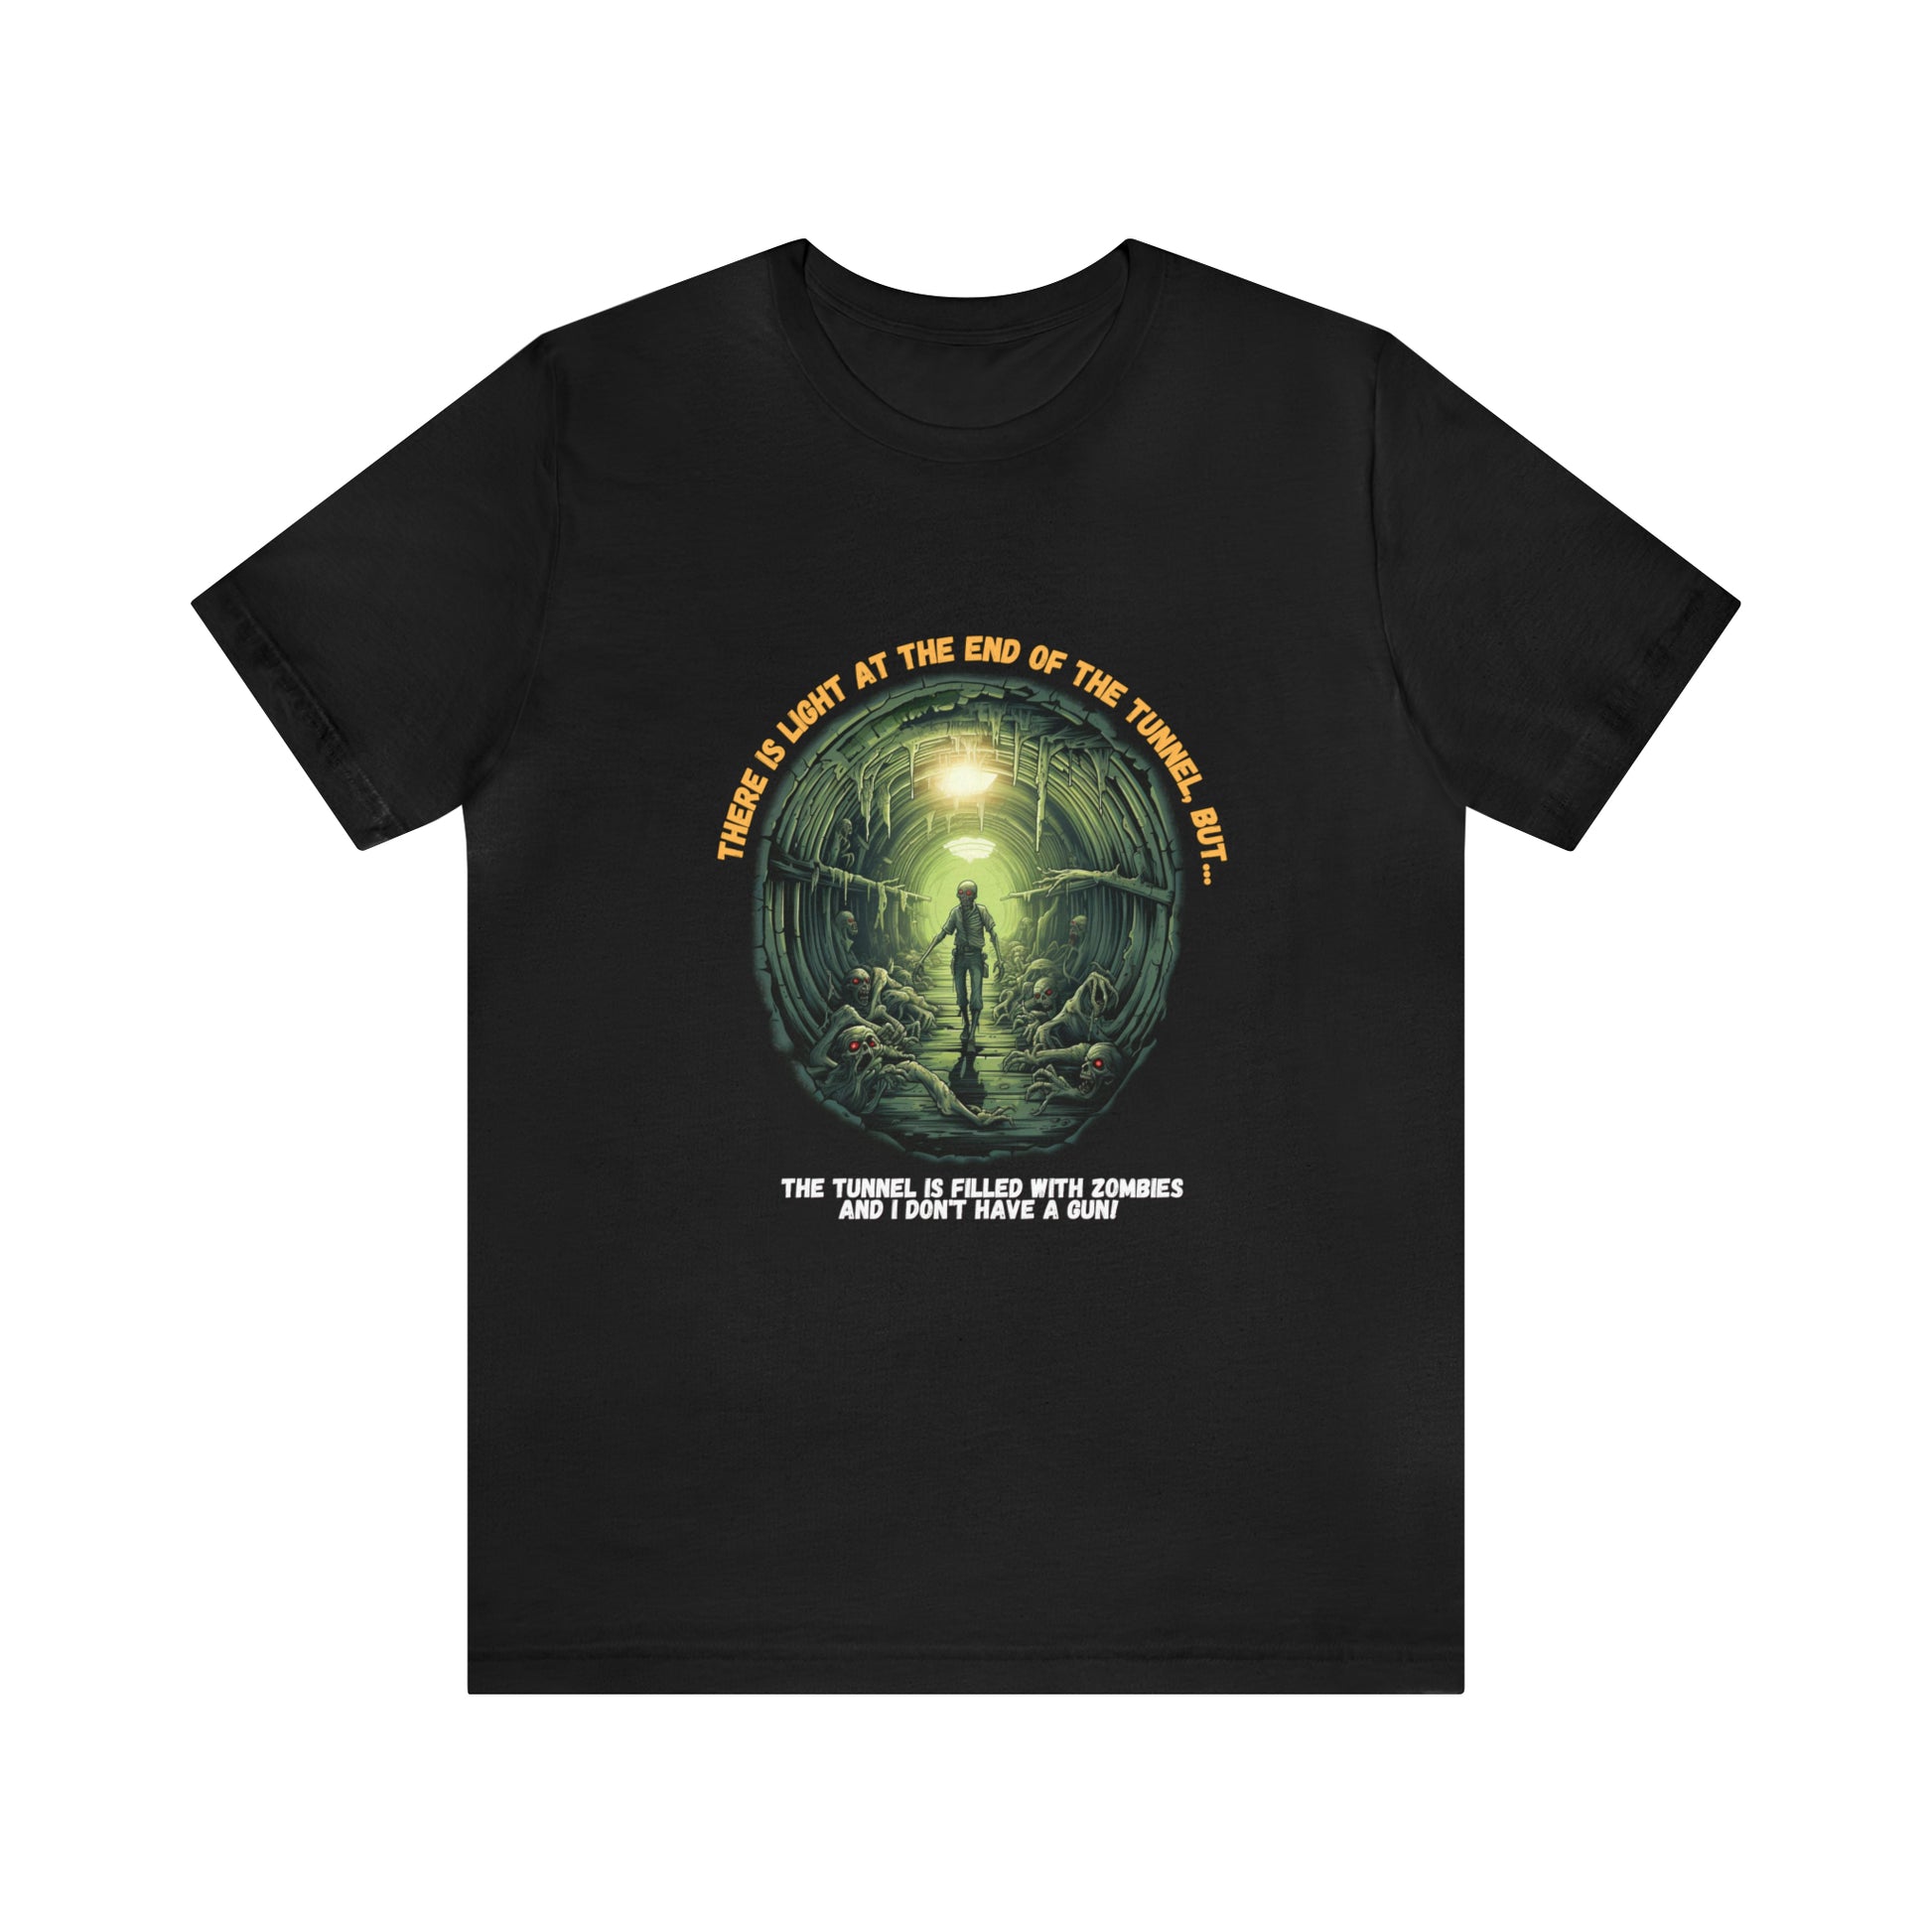 Inspirational ZOMBIE TEE | Funny ZOMBIE TEE SHIRT |  Funny Unisex Short Sleeve Tee | Funny "Light at the end of the tunnel" Shirt - CrazyTomTShirts